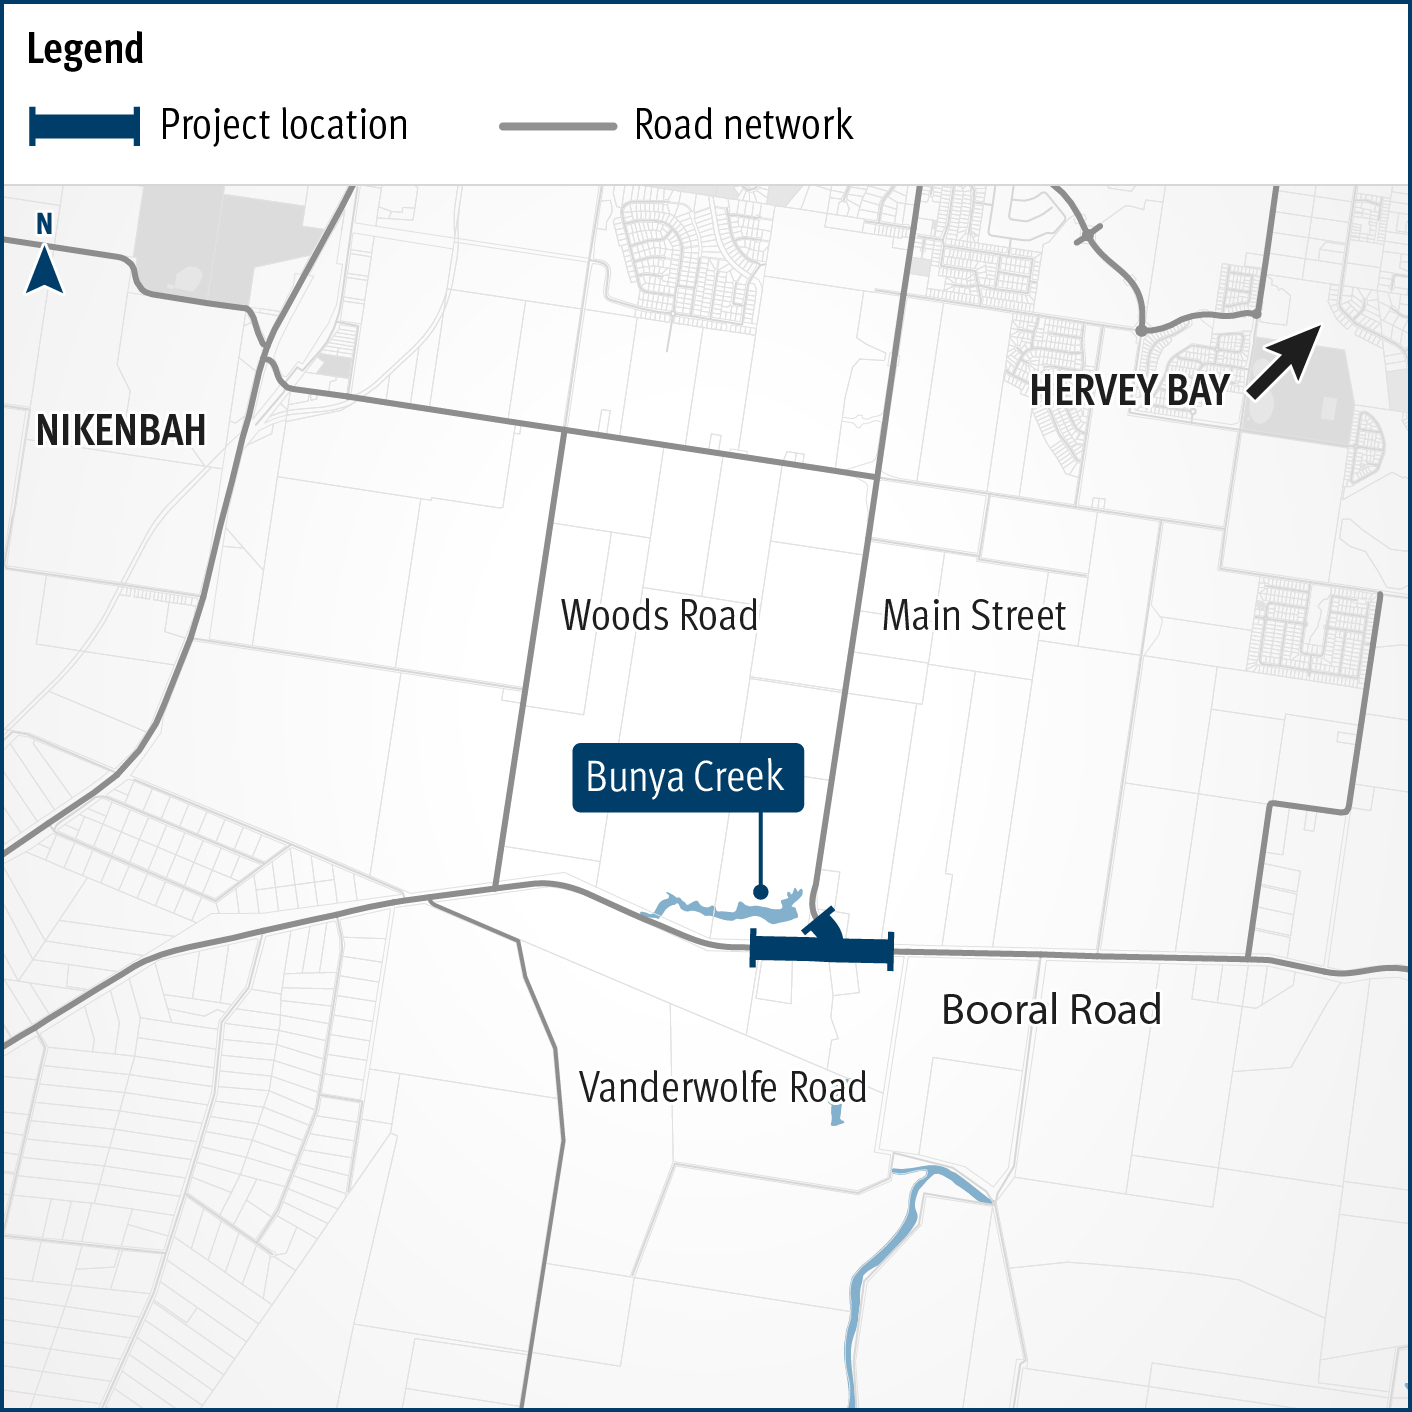 Alternative text: The map shows the locality of the proposed Booral Road, Bunya Creek floodway and Main Street intersection upgrade. Nikenbah is located to the north and Hervey Bay to the north-east. Bunya Creek is located just north west of the proposed project location. A solid dark blue line indicates the project extent, which encompasses the Booral Road and Main Street intersection as well as the Bunya Creek floodway along Booral Road, which is located just west of the intersection. The local road network, including Woods Road and Vanderwolfe Road are also highlighted on the map.